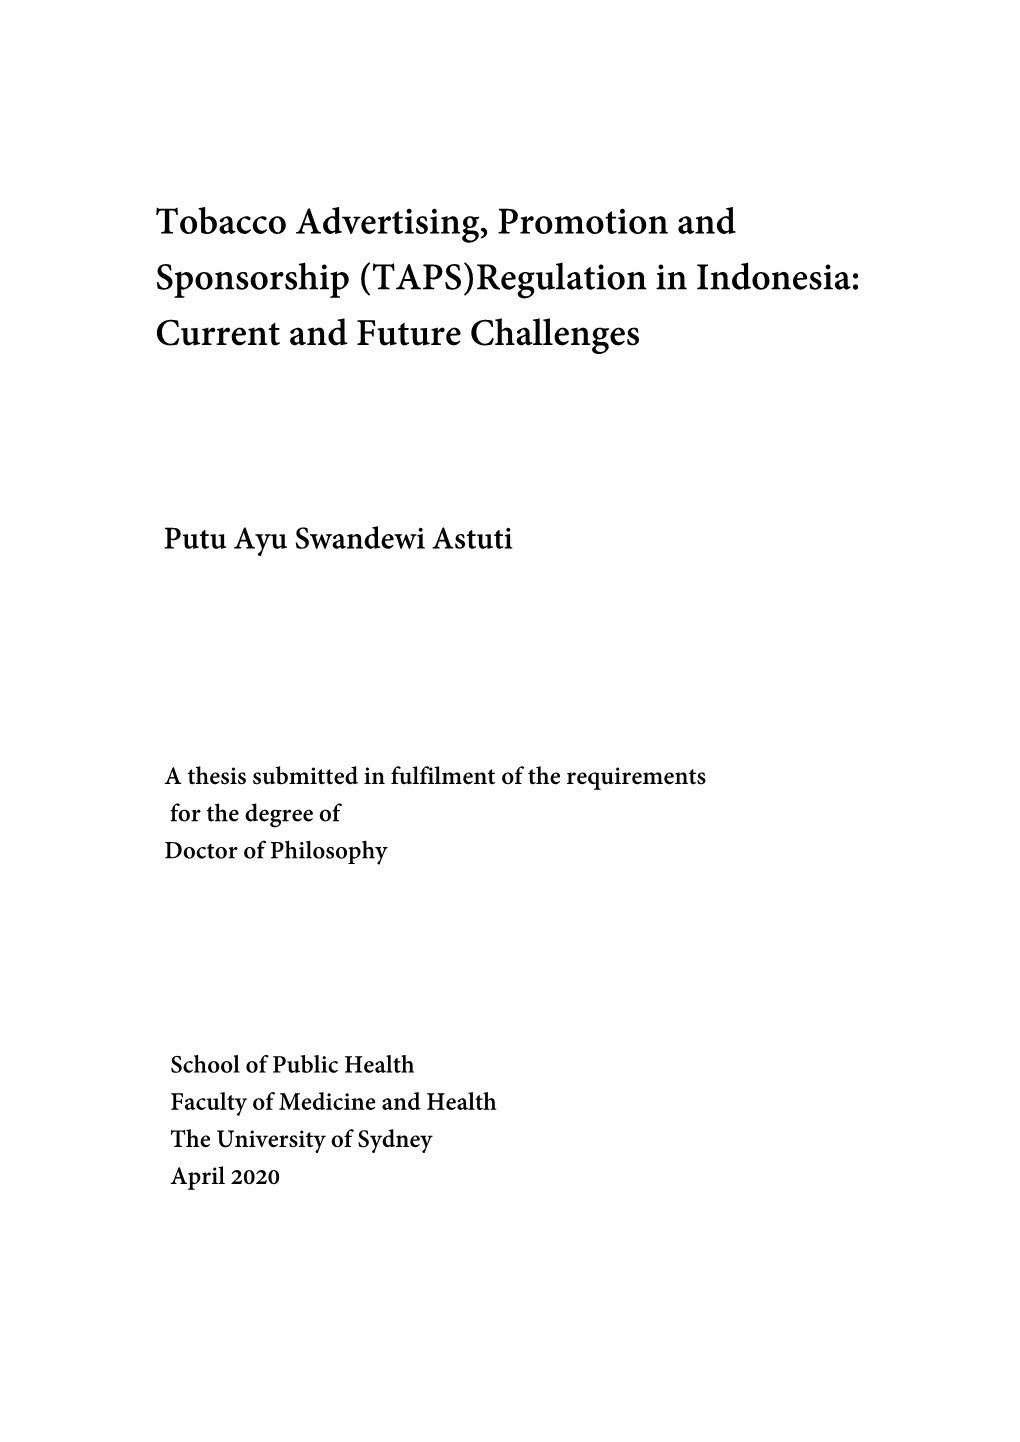 Tobacco Advertising, Promotion and Sponsorship (TAPS)Regulation in Indonesia: Current and Future Challenges